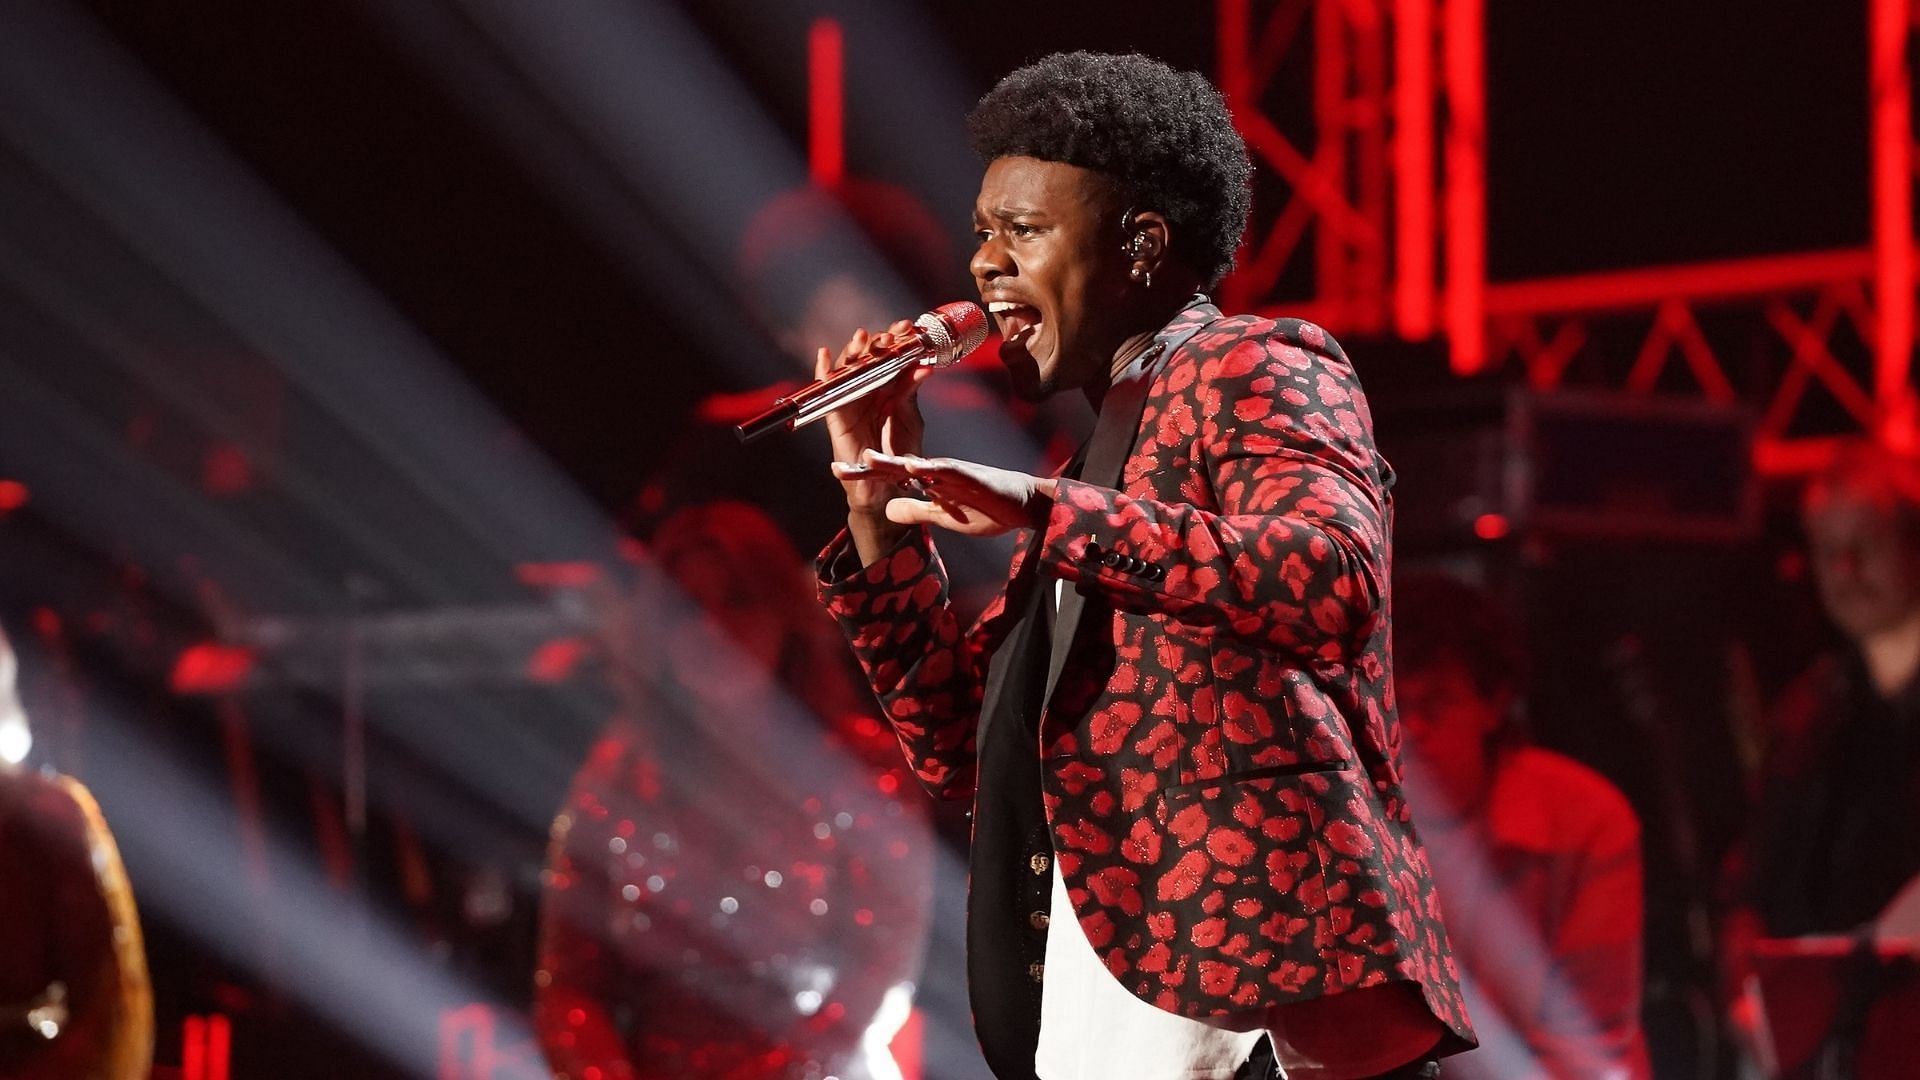 American Idol&#039;s fans were unimpressed with contestant Jay Copeland&#039;s performance (Image via Eric McCandless/ABC)